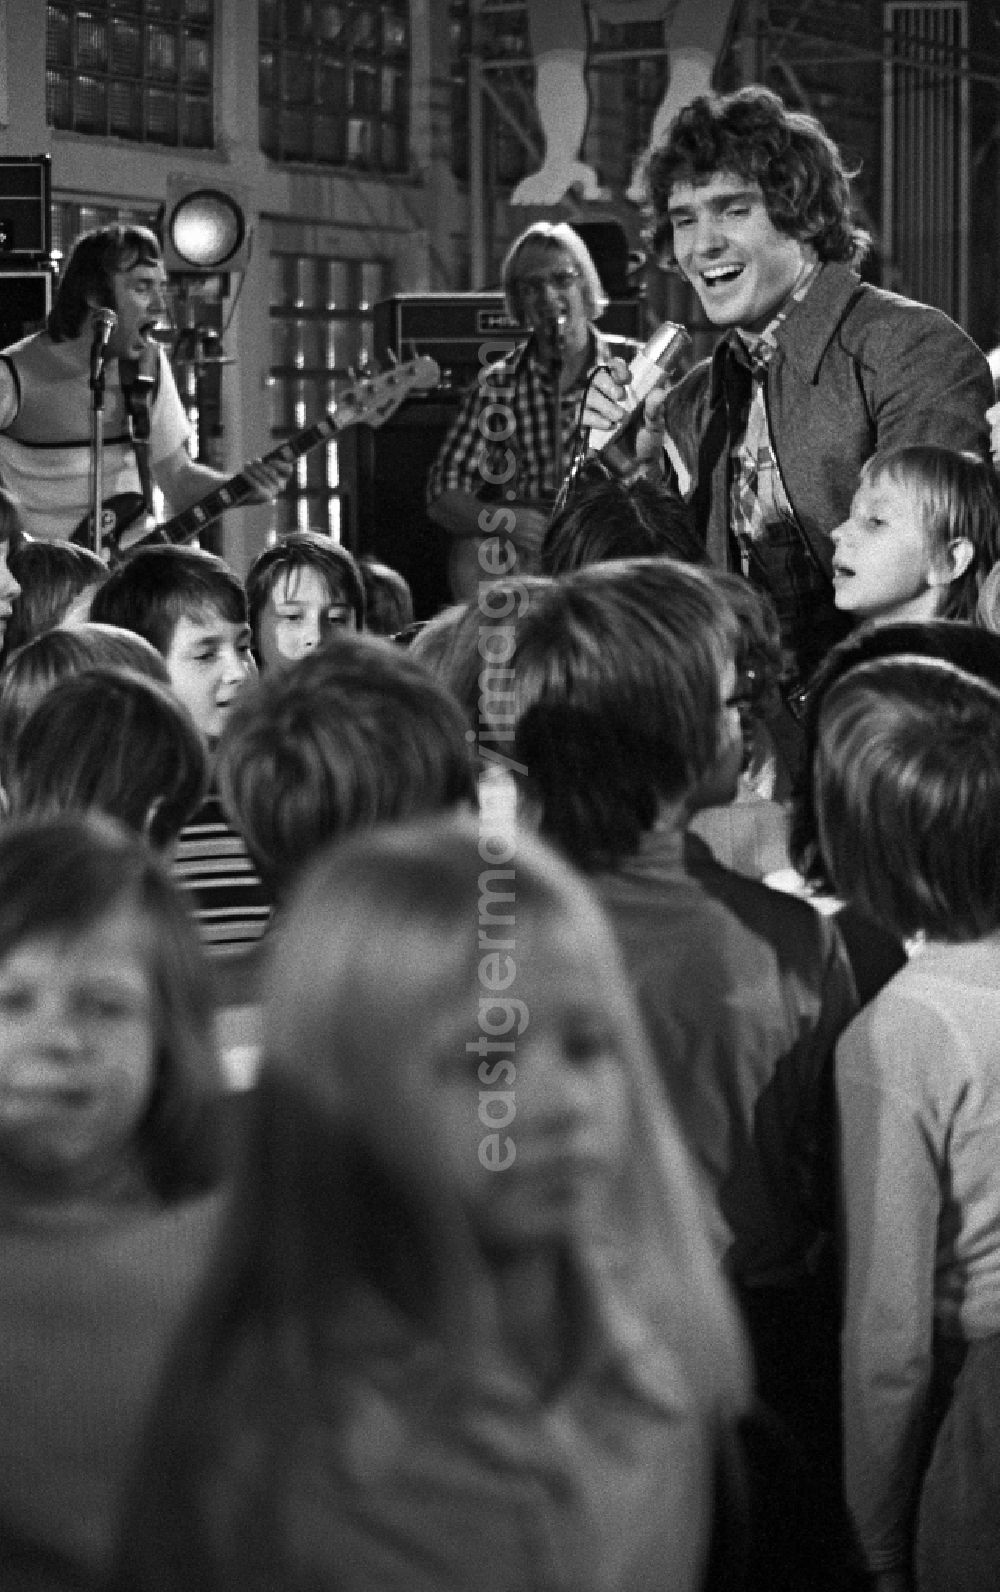 GDR picture archive: Berlin - Musician Frank Schoebel sings songs from the record Komm wir malen eine Sonne with a group of children in Berlin, the former capital of the GDR, German Democratic Republic